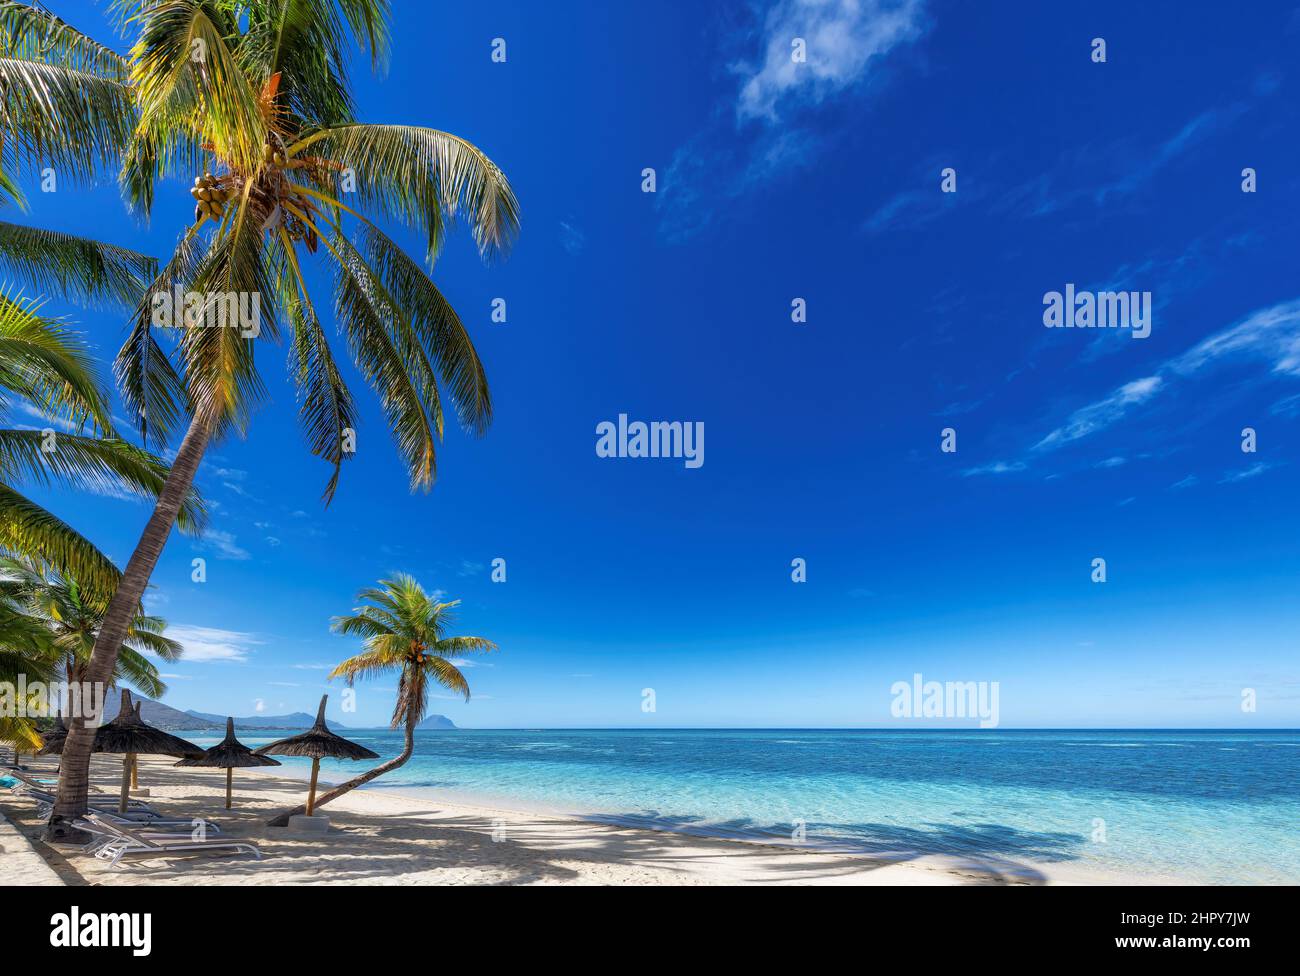 Palm trees in tropical sunny beach resort in Mauritius island. Stock Photo